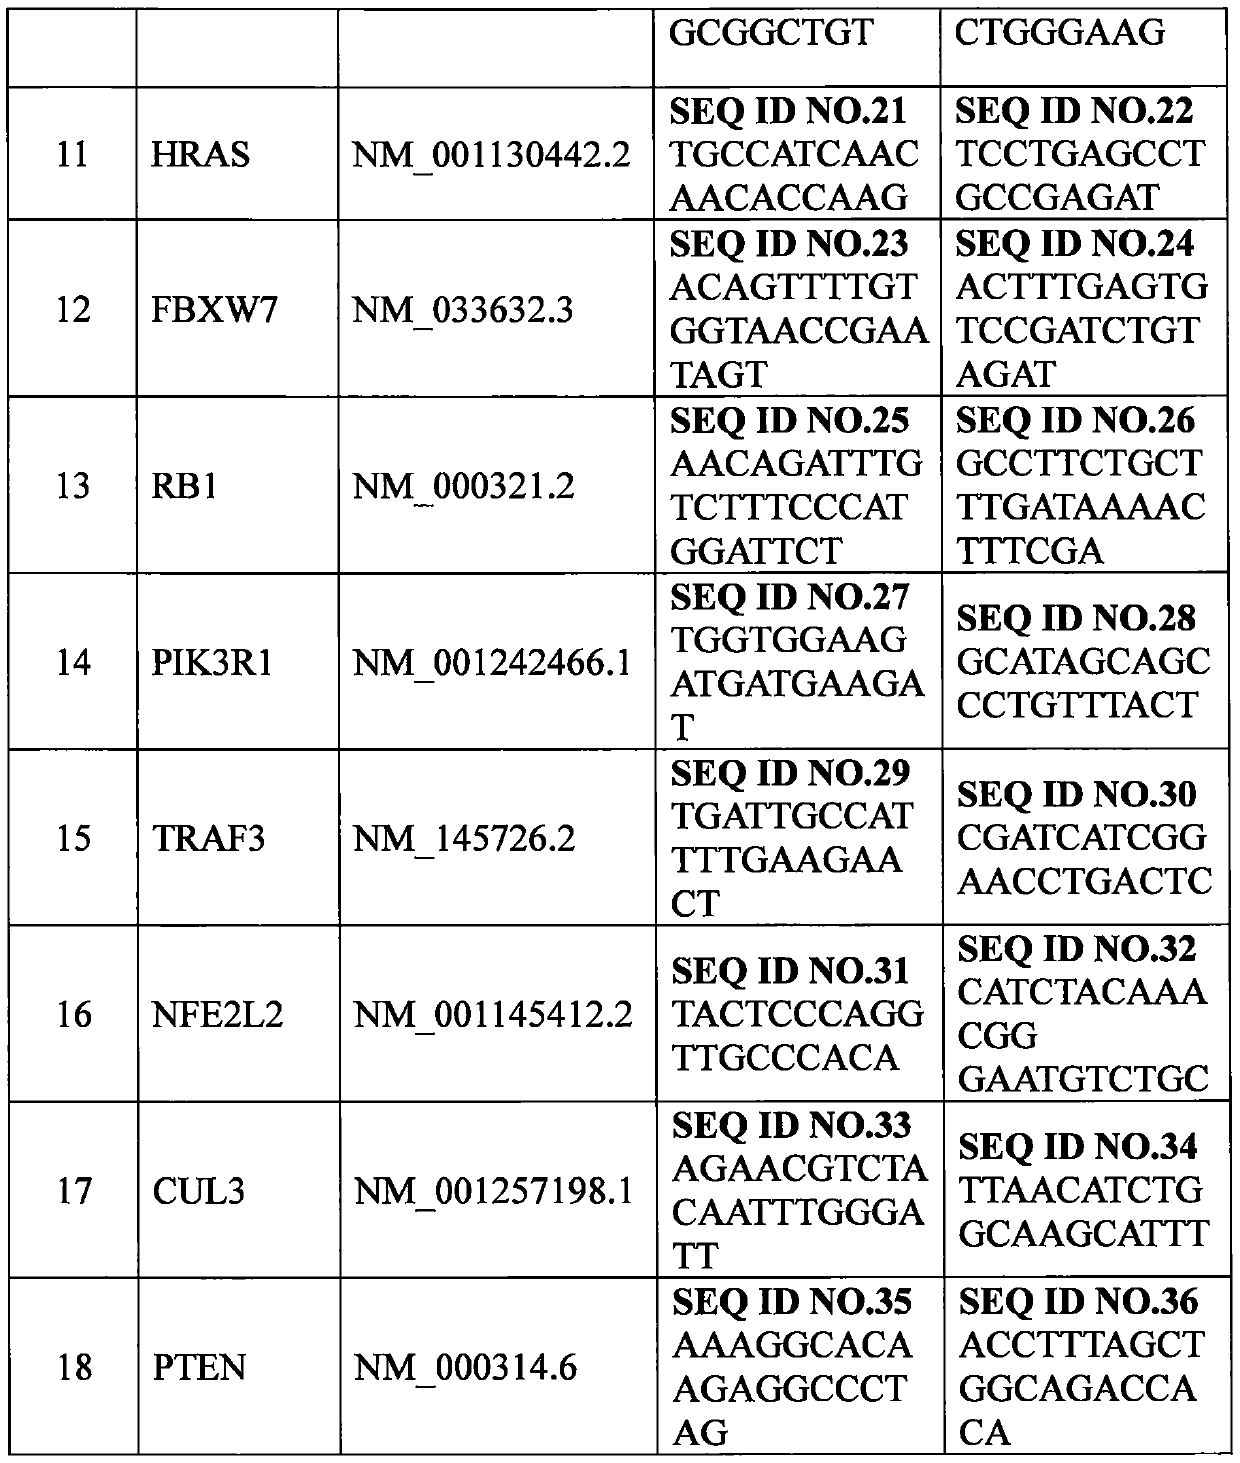 A panel of genes and their application for molecular typing of squamous cell carcinoma of the head and neck